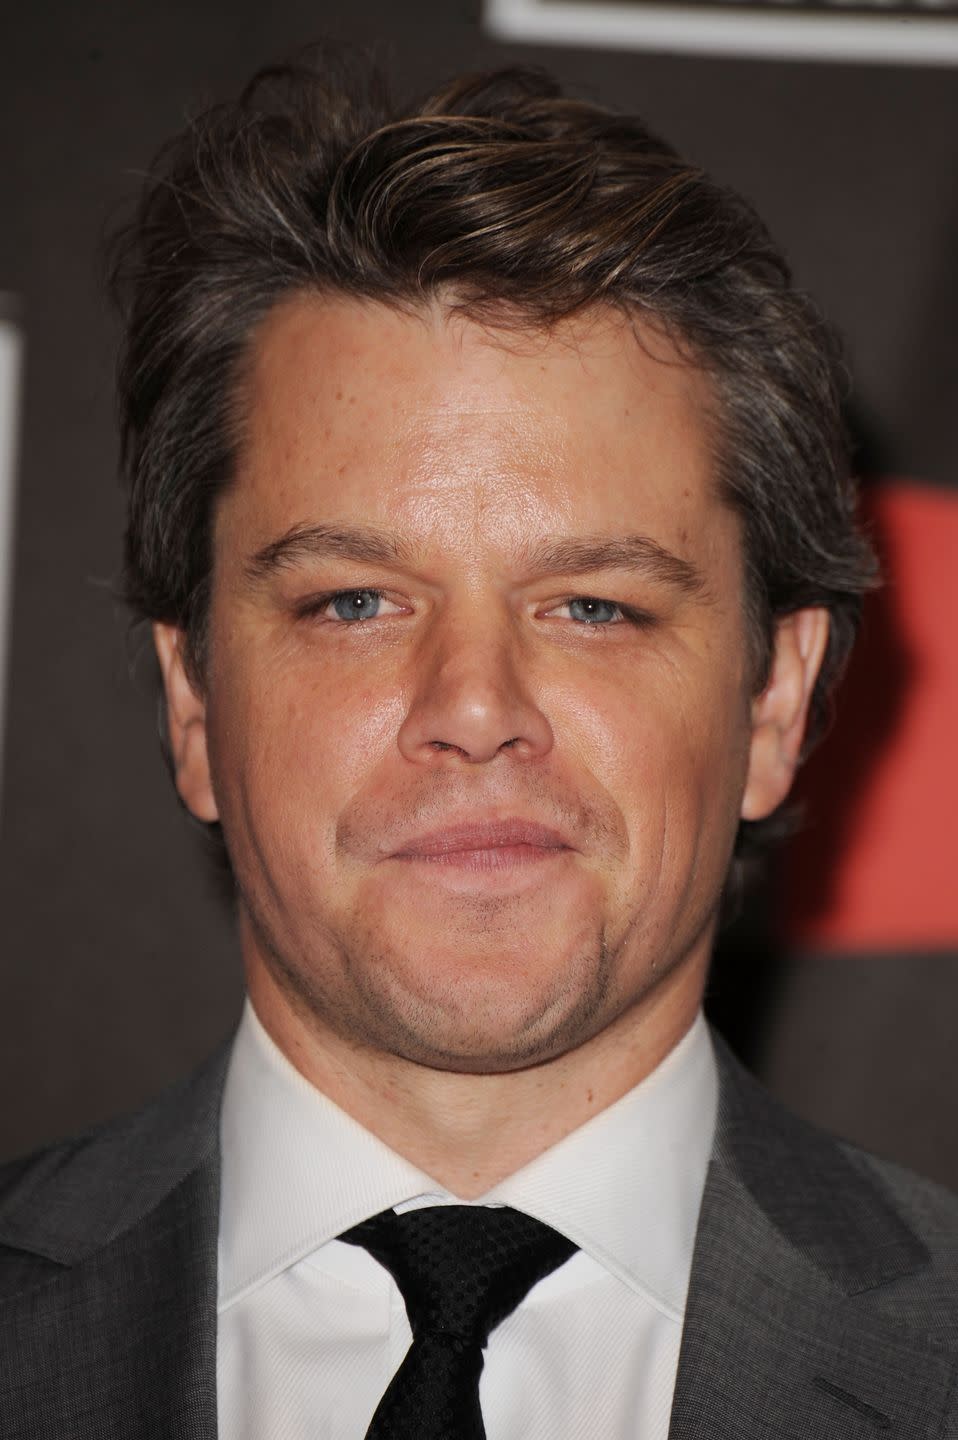 <p>Even since his <em>Good Will Hunting </em>days, Matt Damon has kept his hairstyle pretty consistent with a variation of short, polished cuts. </p>